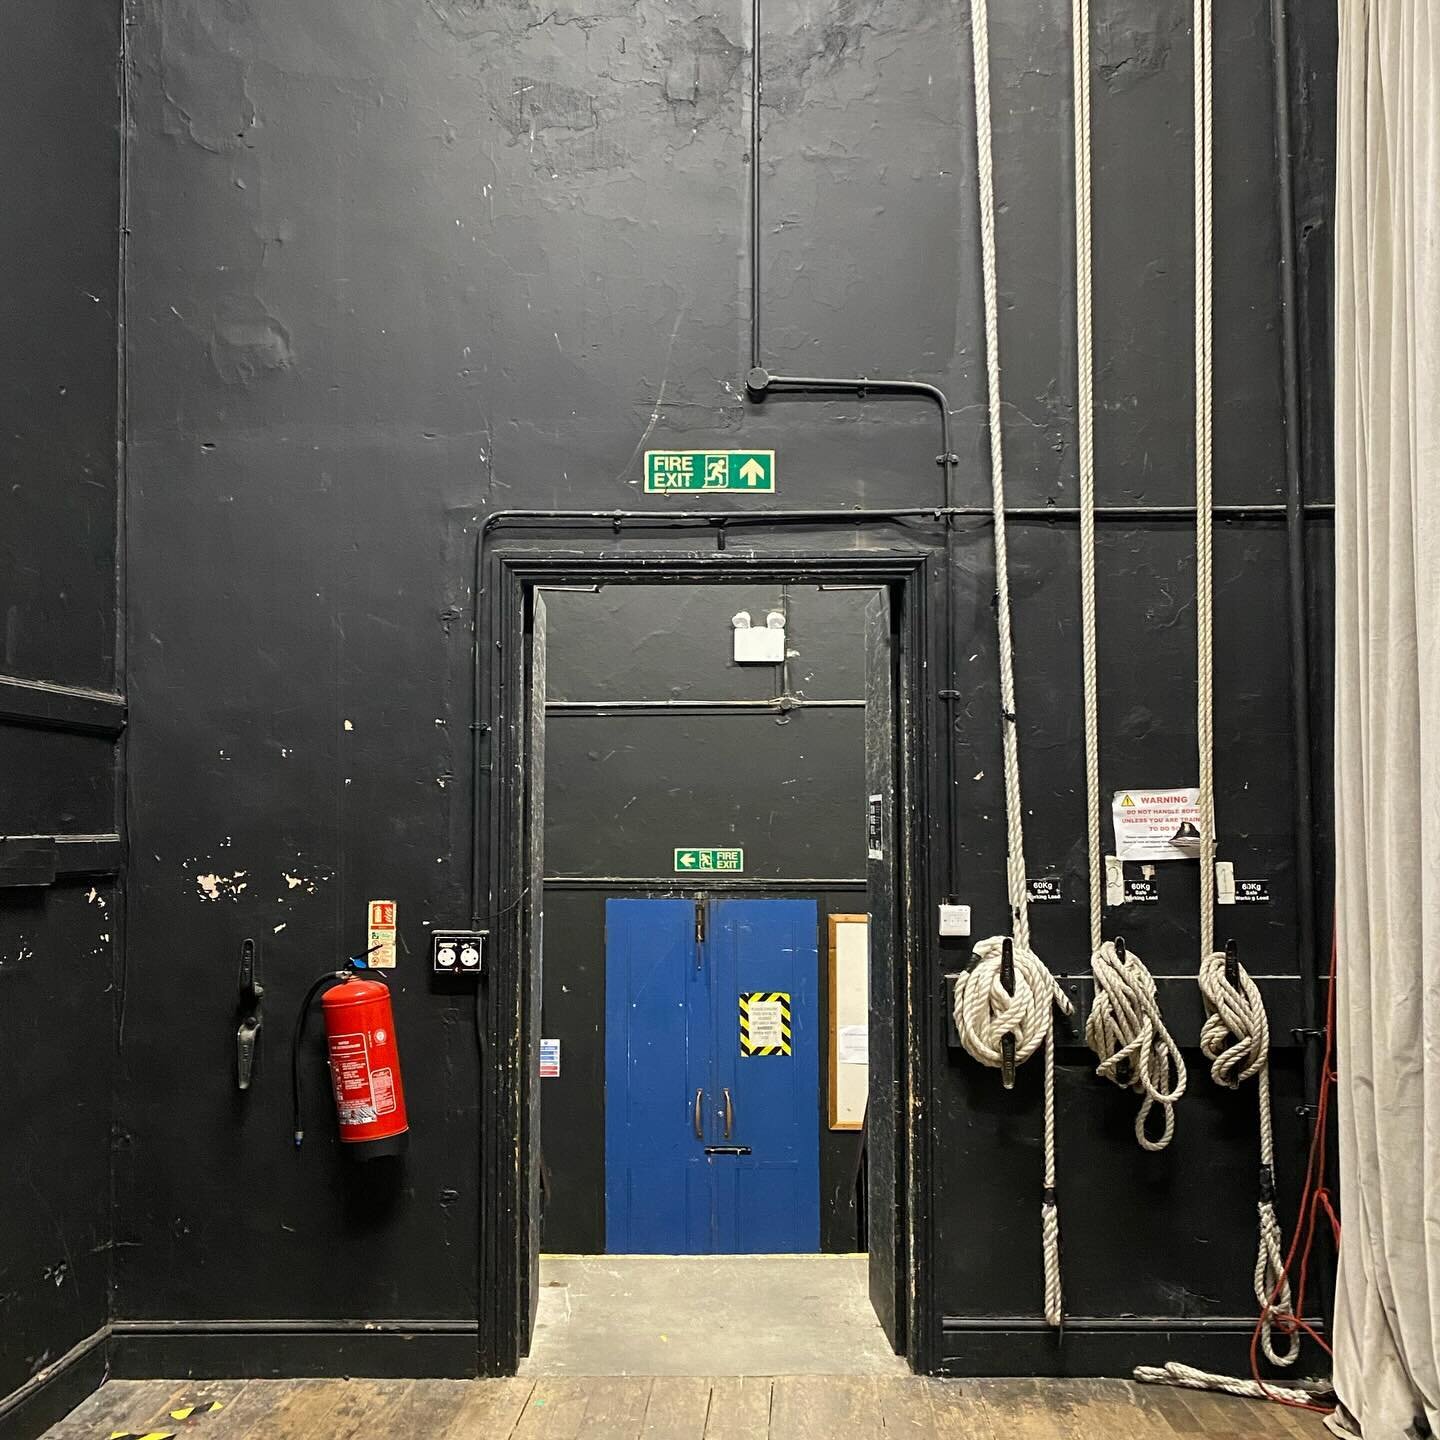 Loving that we&rsquo;ve made it back to working in theatre-world. Some of my favourite spaces for the combination of (slightly battered) beauty and pure utilitarianism. 

We&rsquo;ve been working over the autumn with @connollywellingham and @plannpro